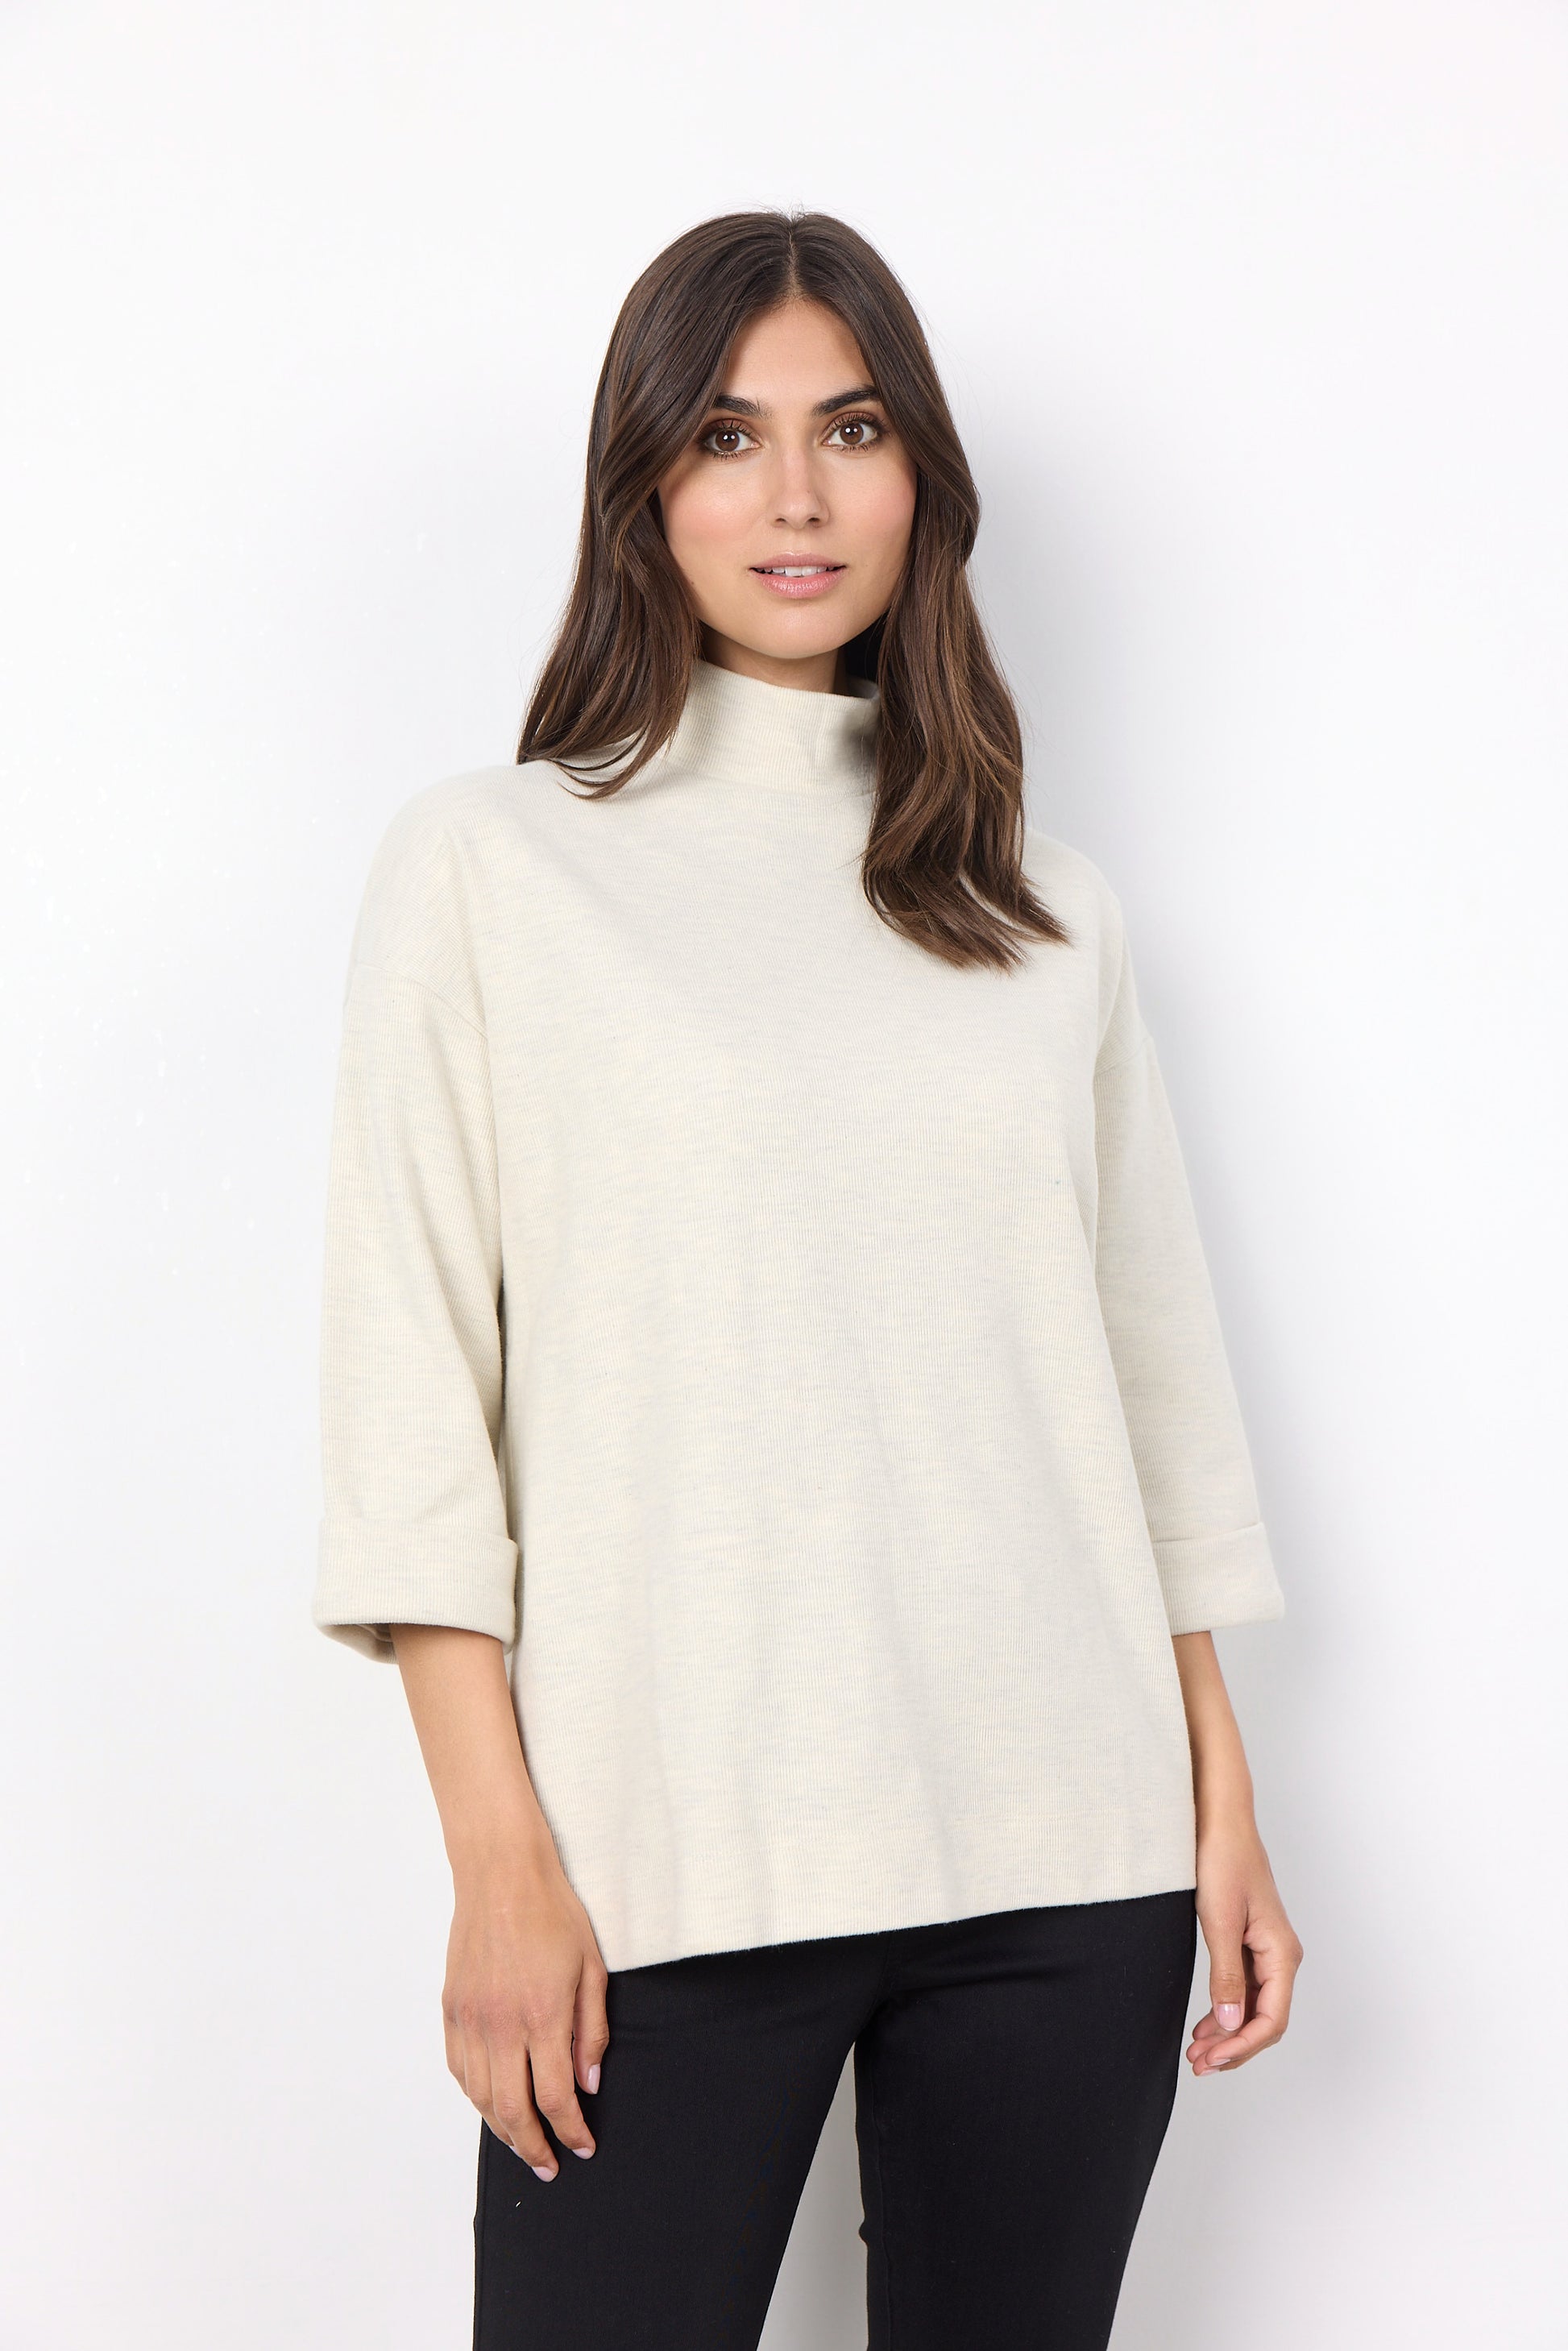 Soya Concept Ally 2 Blouse In Cream